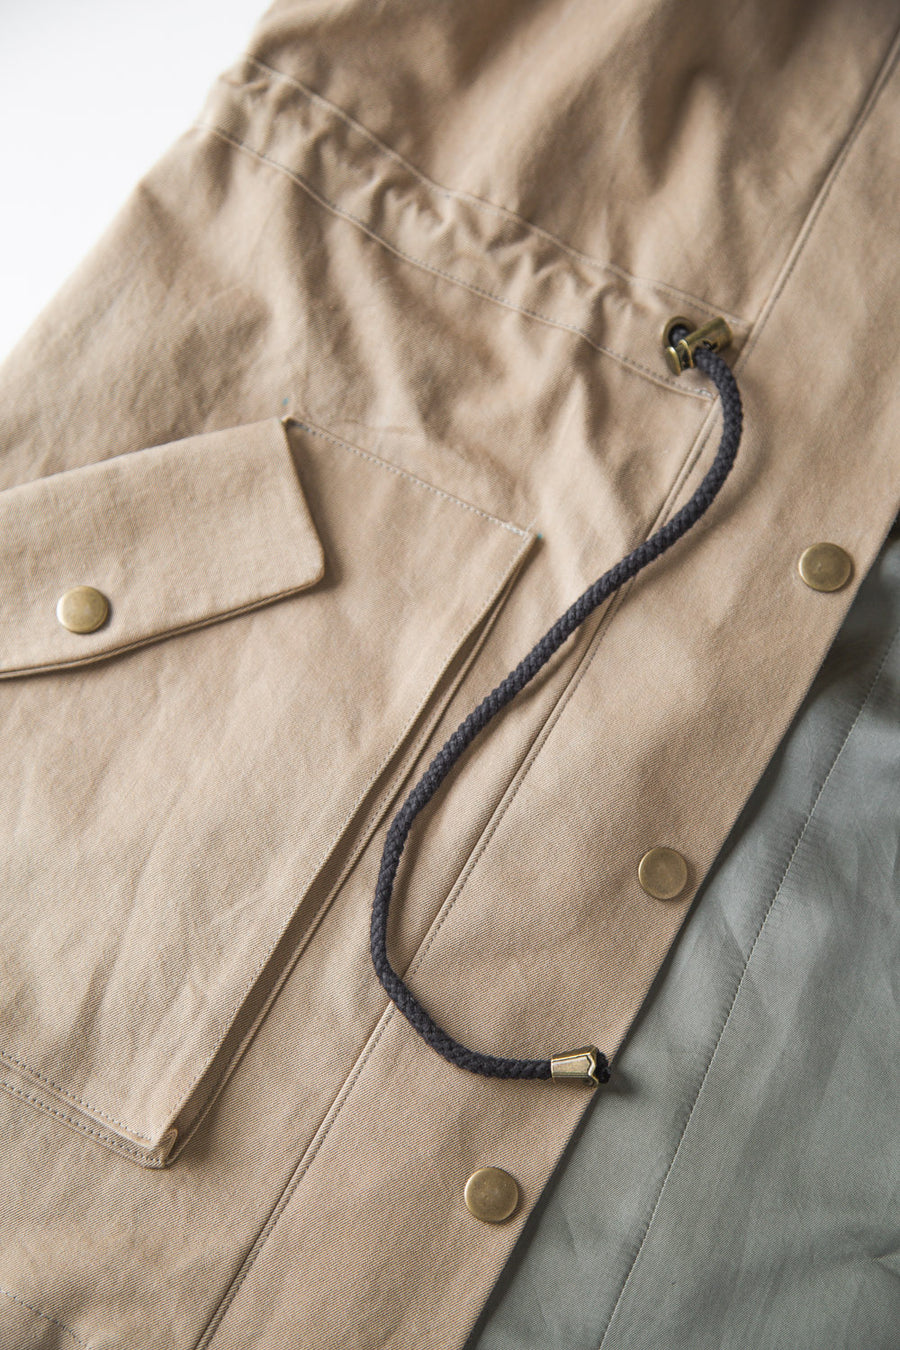 Kelly Anorak Hardware kit // Spring snap buttons, grommets + setting tools // Closet Core Patterns